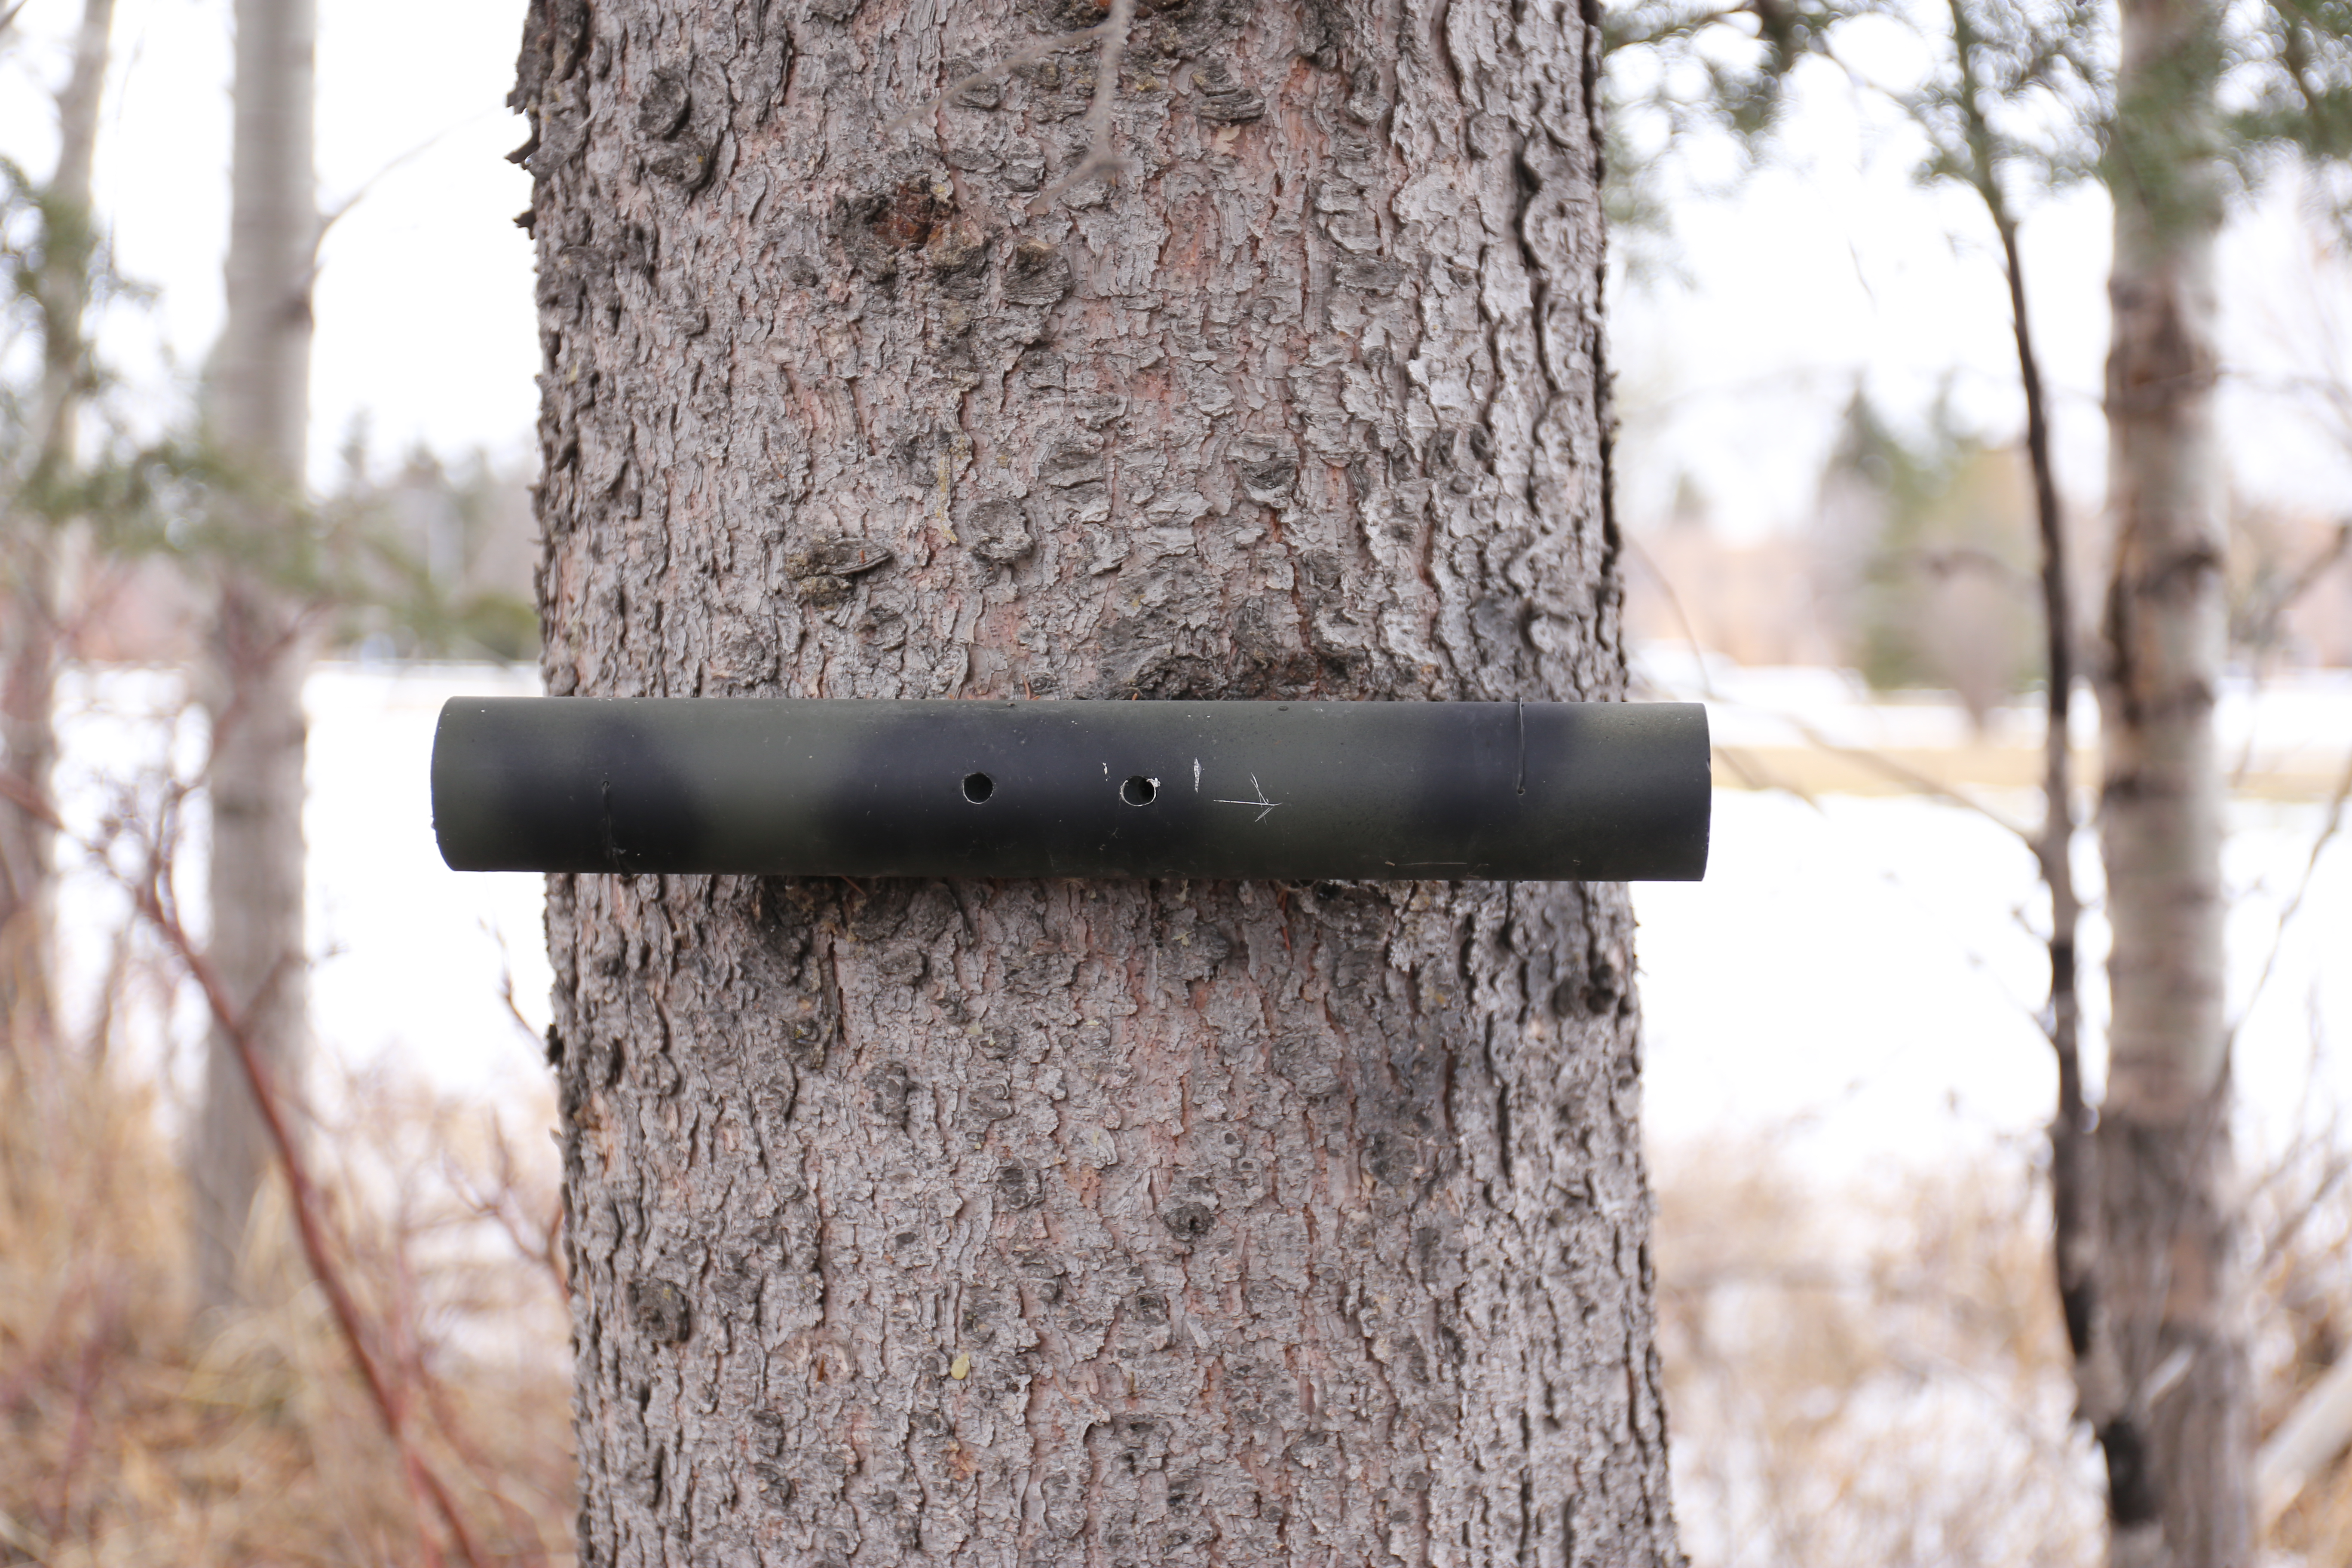 Your geo-scope. (No living trees were harmed during the placement of this geocache.)